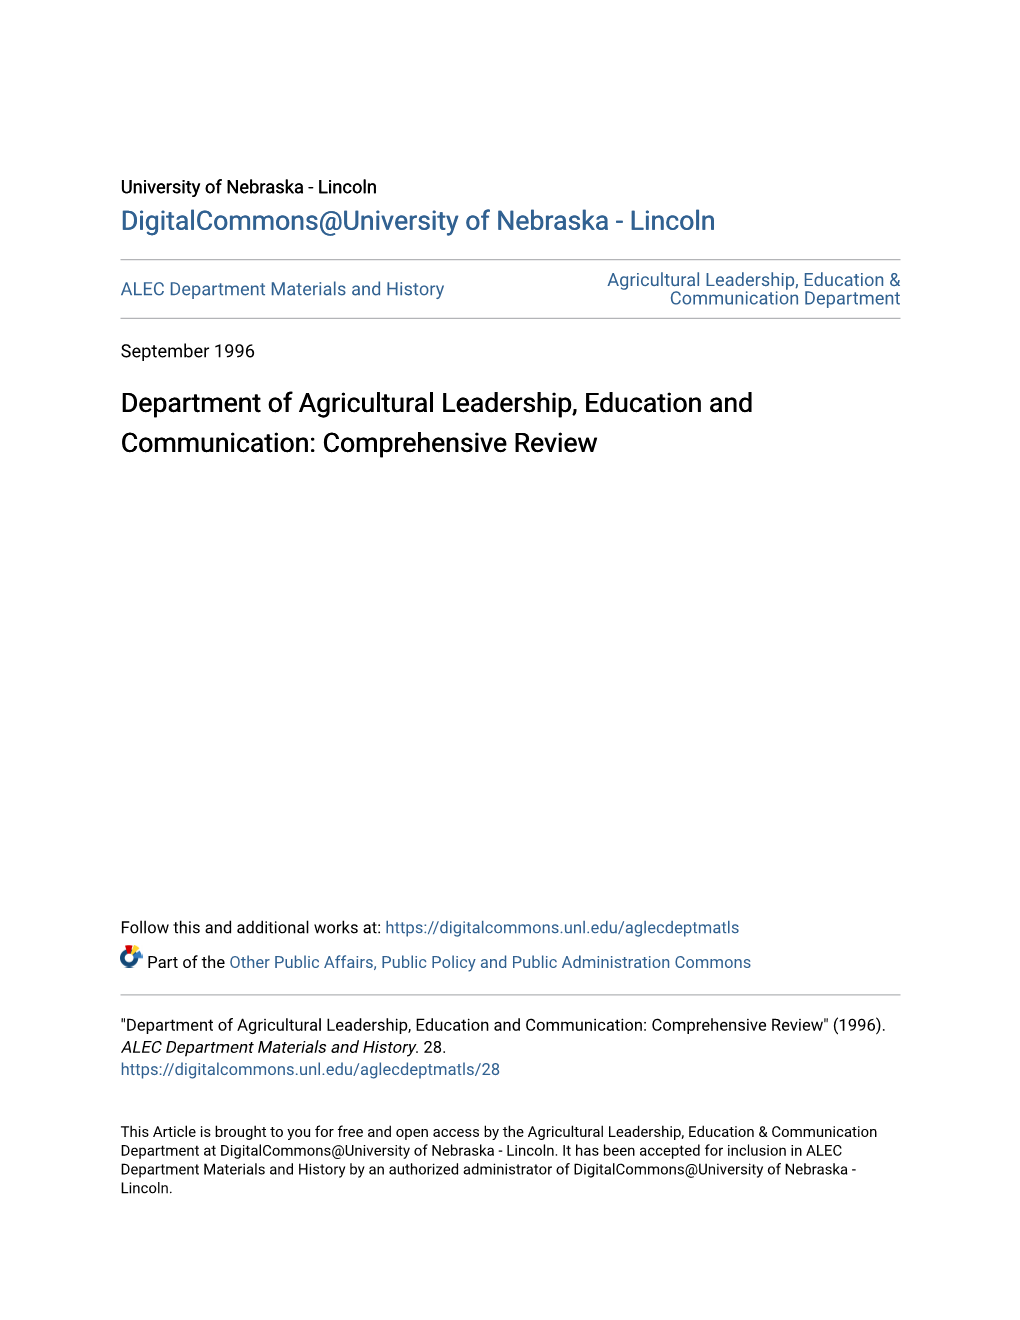 Department of Agricultural Leadership, Education and Communication: Comprehensive Review